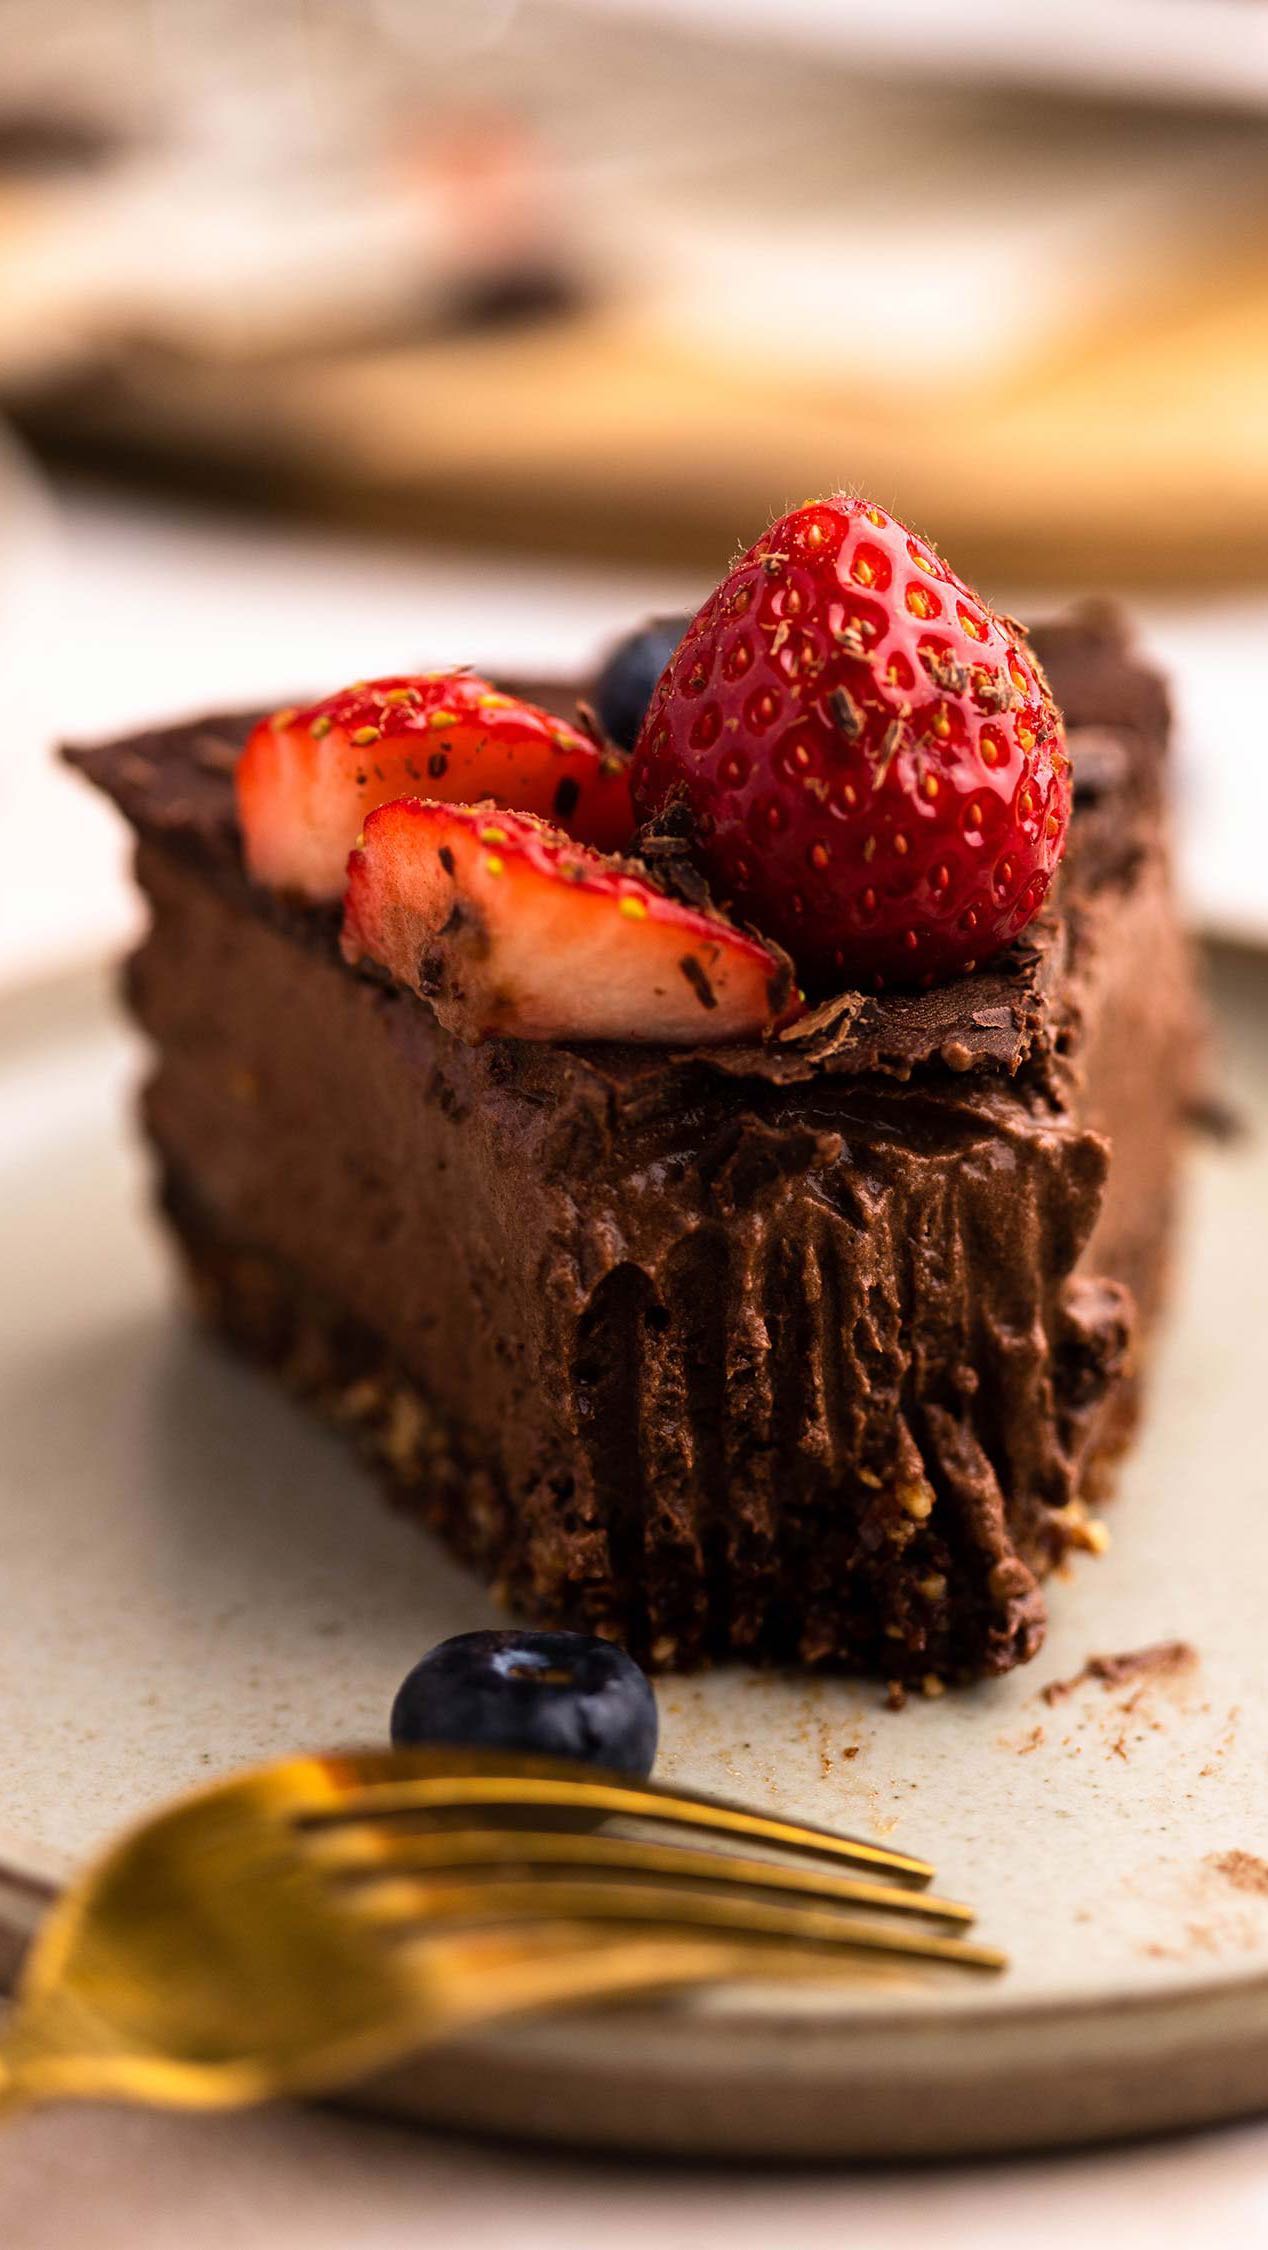 Do you like no bake recipes? This no-bake chocolate mousse cake is perfect to make this summer! You can chill the cake in the freezer, thaw slightly and eat it like a chocolate ice cream cake🤤❤️ You can find the recipe on the blog!

https://thechestnutbakery.com/vegan-chocolate-mousse-cake/
Or search "chocolate mousse cake" in the search bar!

Wishing you a nice Wednesday! 
:
:
:
:
:
#chocolatecake #nobake #vegancake #cake #nobakecake #nobakedesserts #veganchocolatecake #チョコレートケーキ #baking #veganbaking #vegan #vegandessert #veganrecipe #veganfood  #healthylifestyle #foodphotography #plantbased #crueltyfree #sustainalbelife #veganlife # #ベーキング #ビーガン #サスティナブル #ヴィーガン #ビーガンスイーツ #ビーガンレシピ #プラントベース #環境に優しい